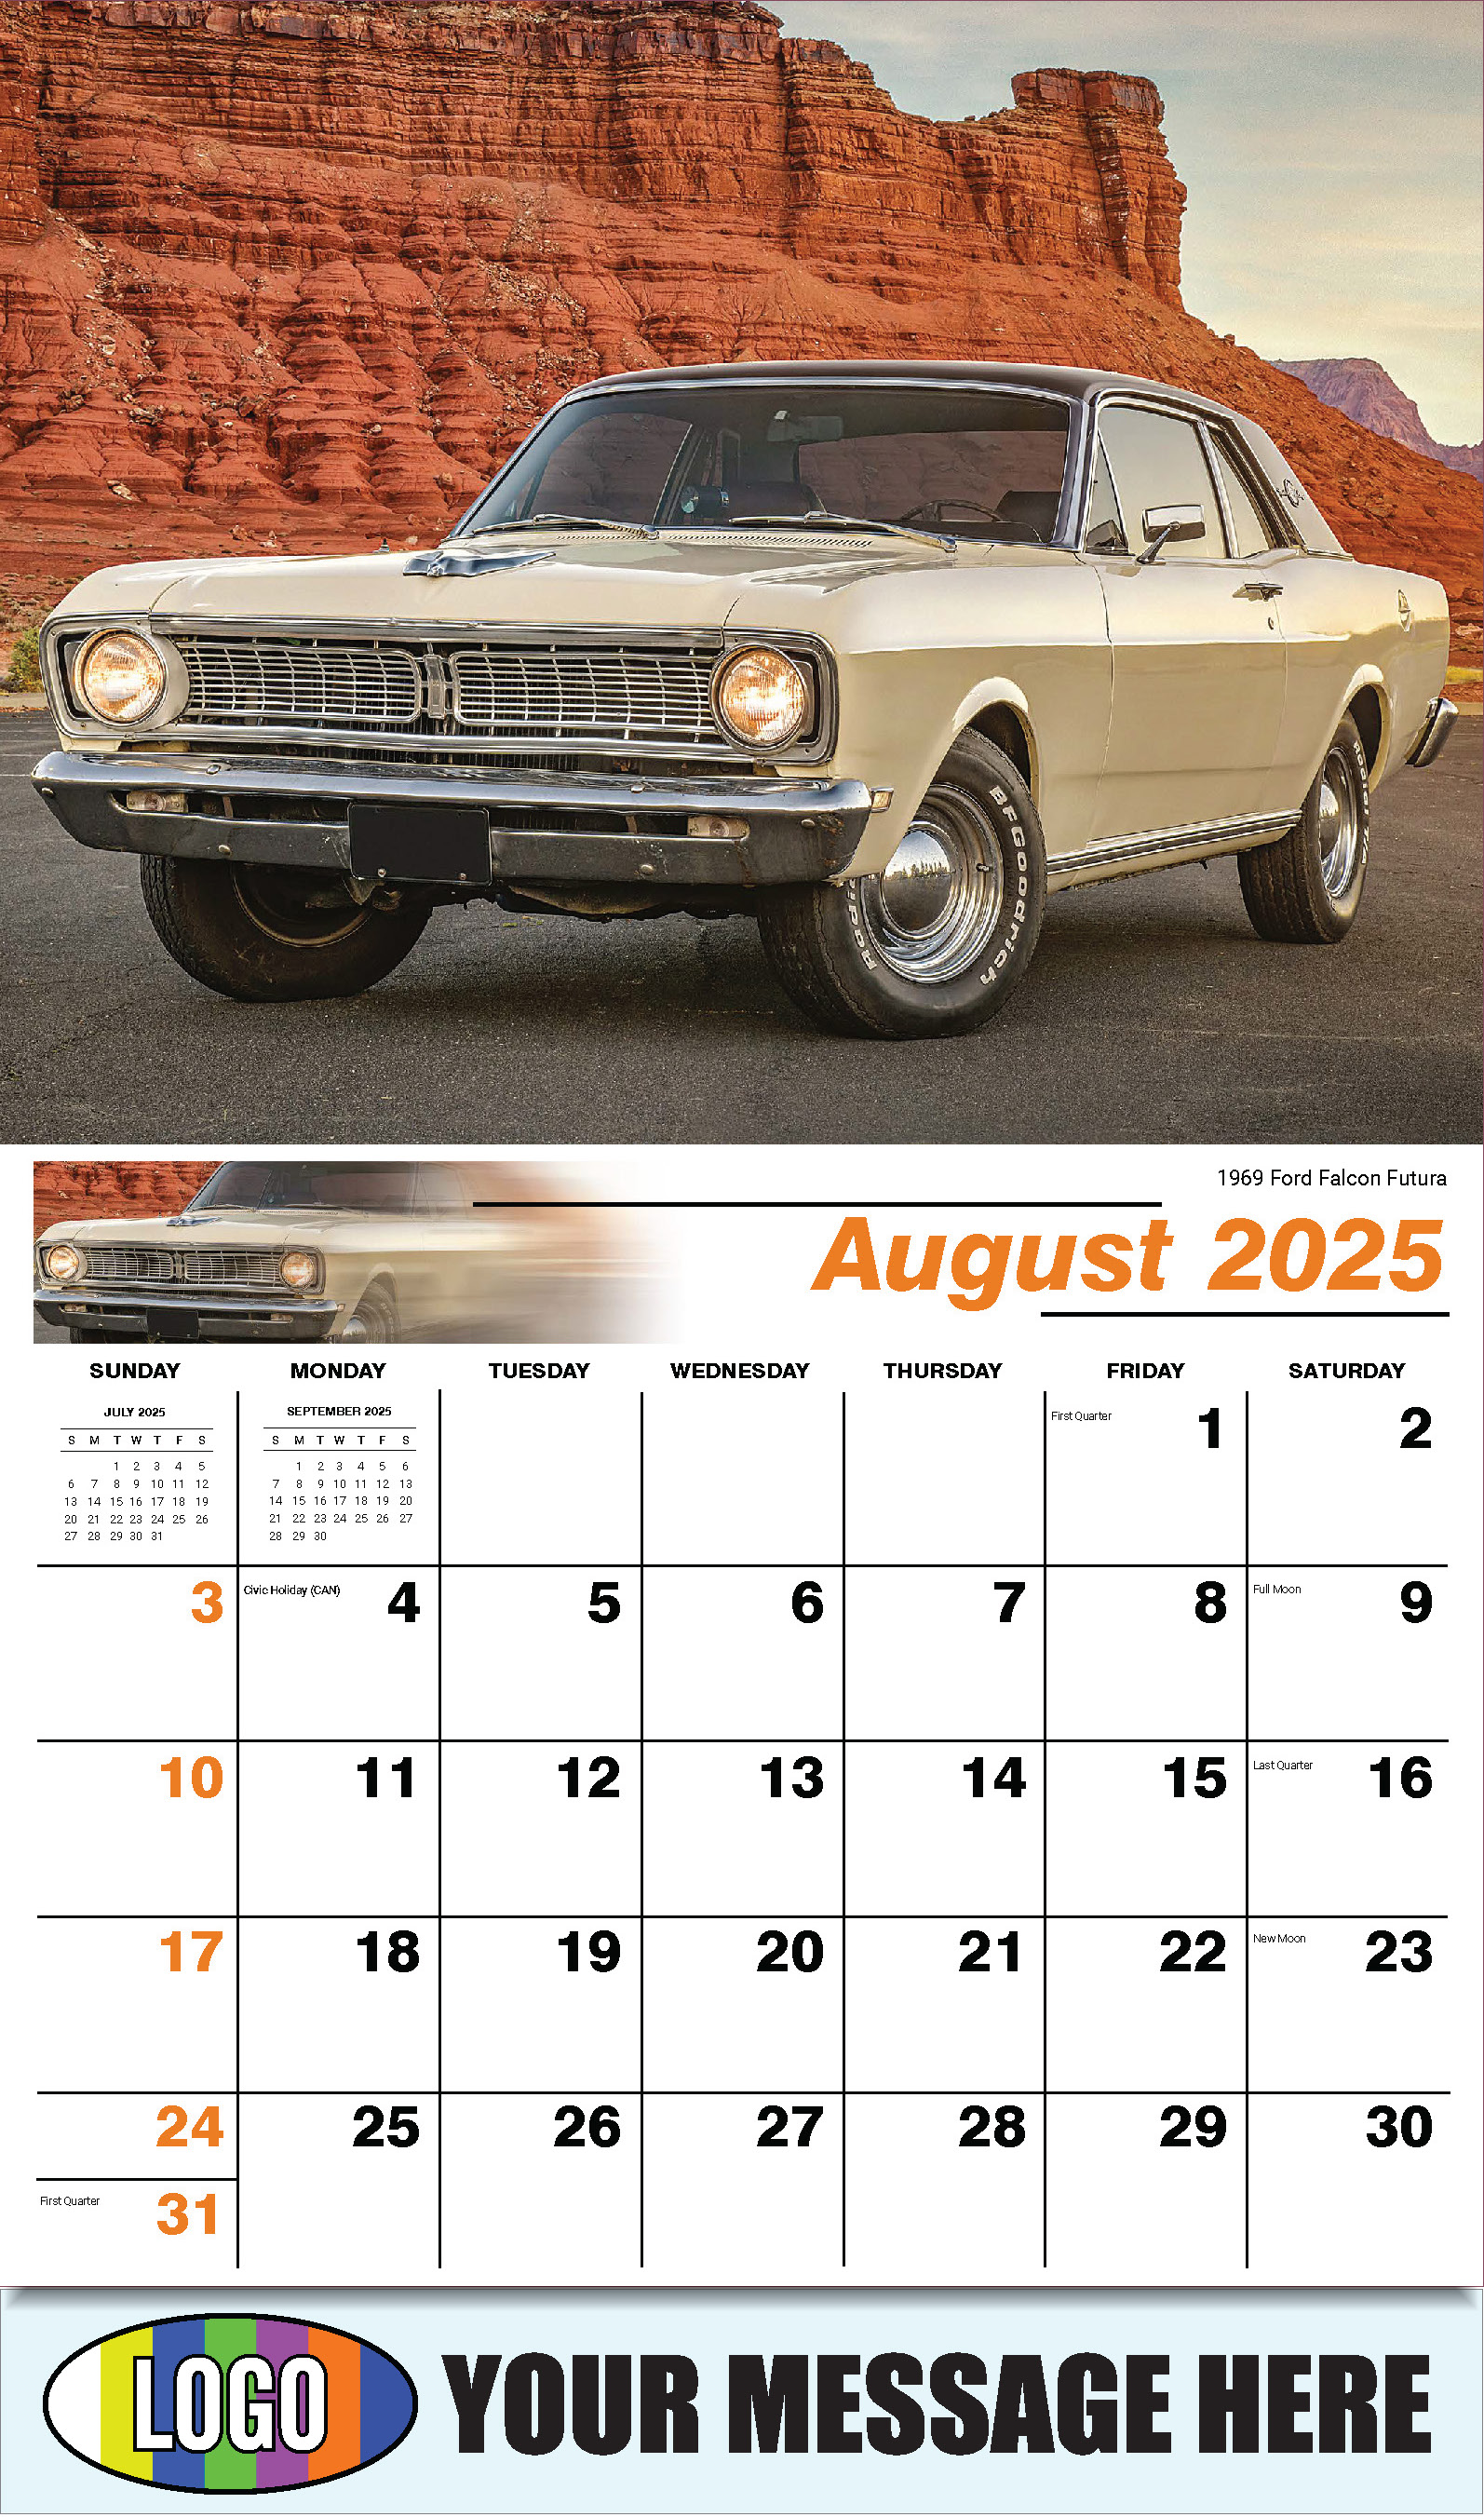 Henry's Heritage FORD Cars 2025 Automotive Business Promo Calendar - August